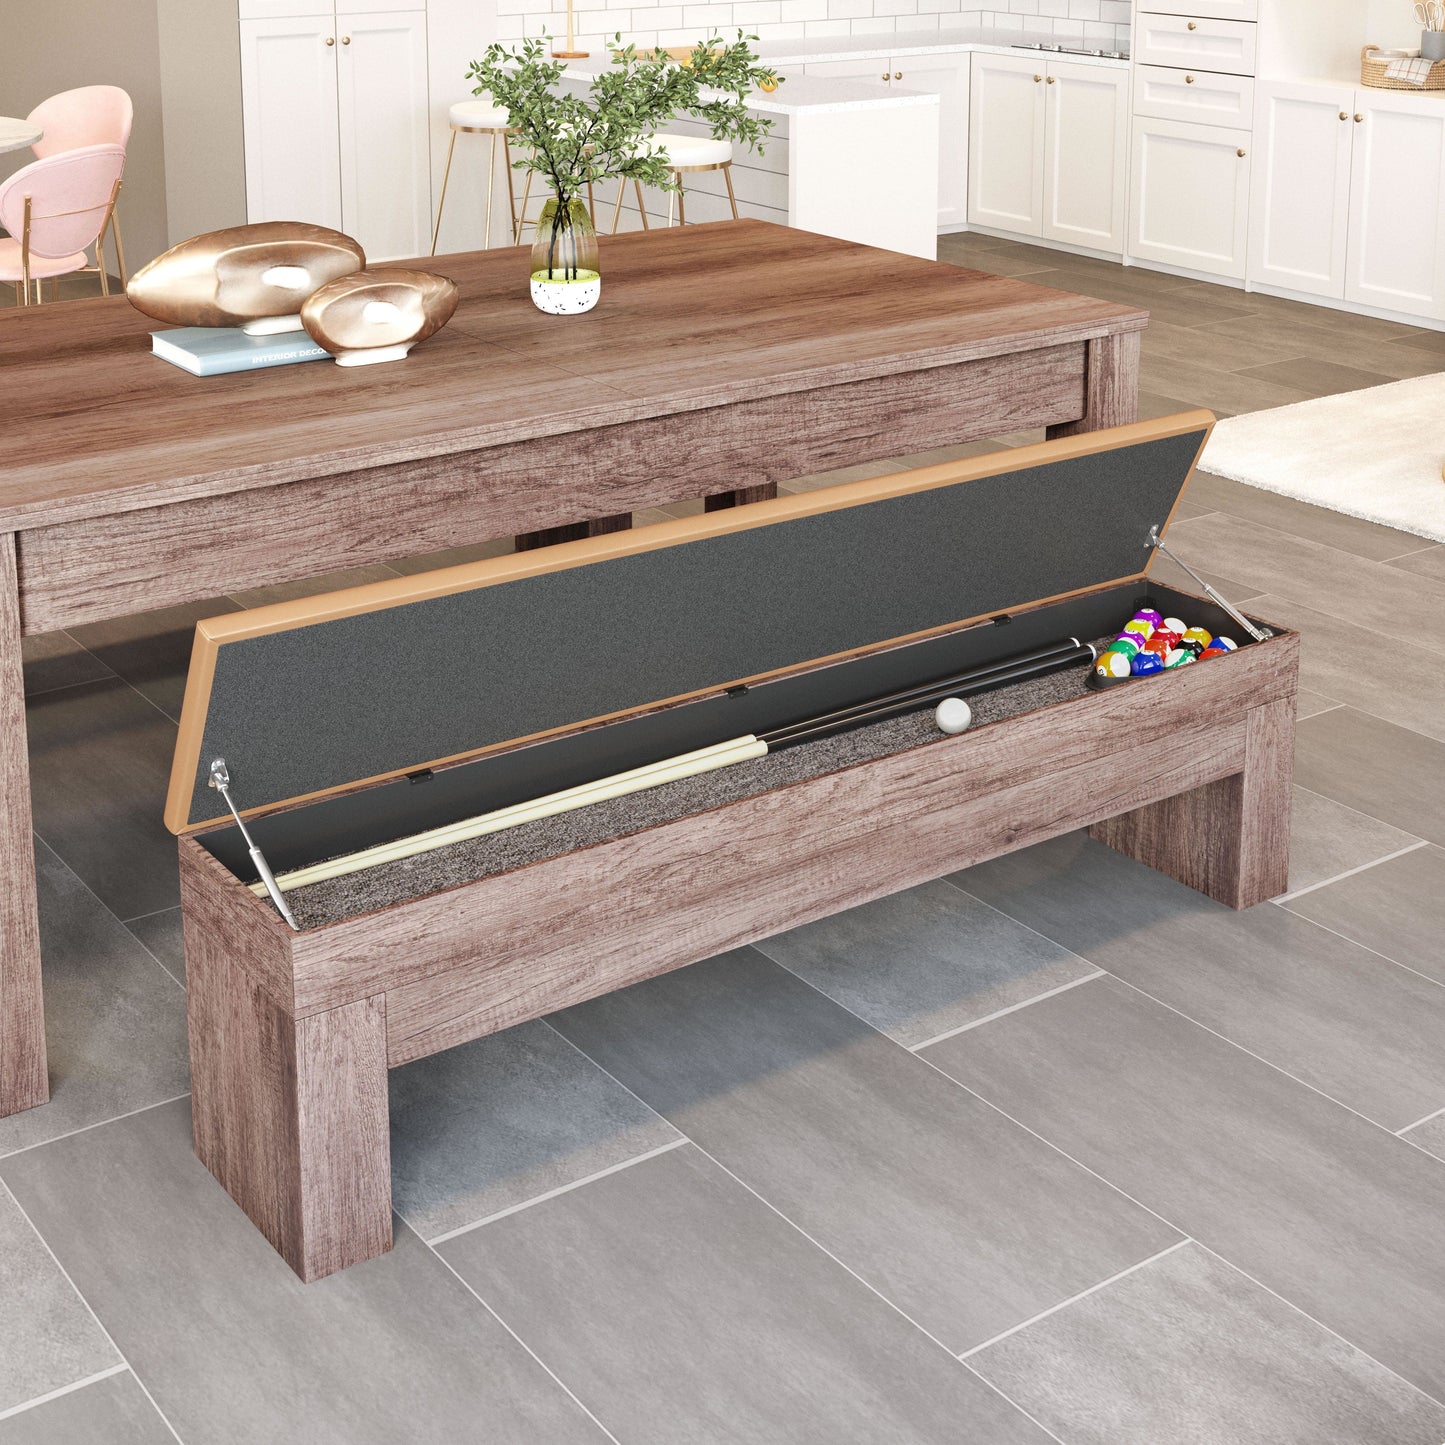 Storage Bench is just the right size for pool sticks and billiard balls 